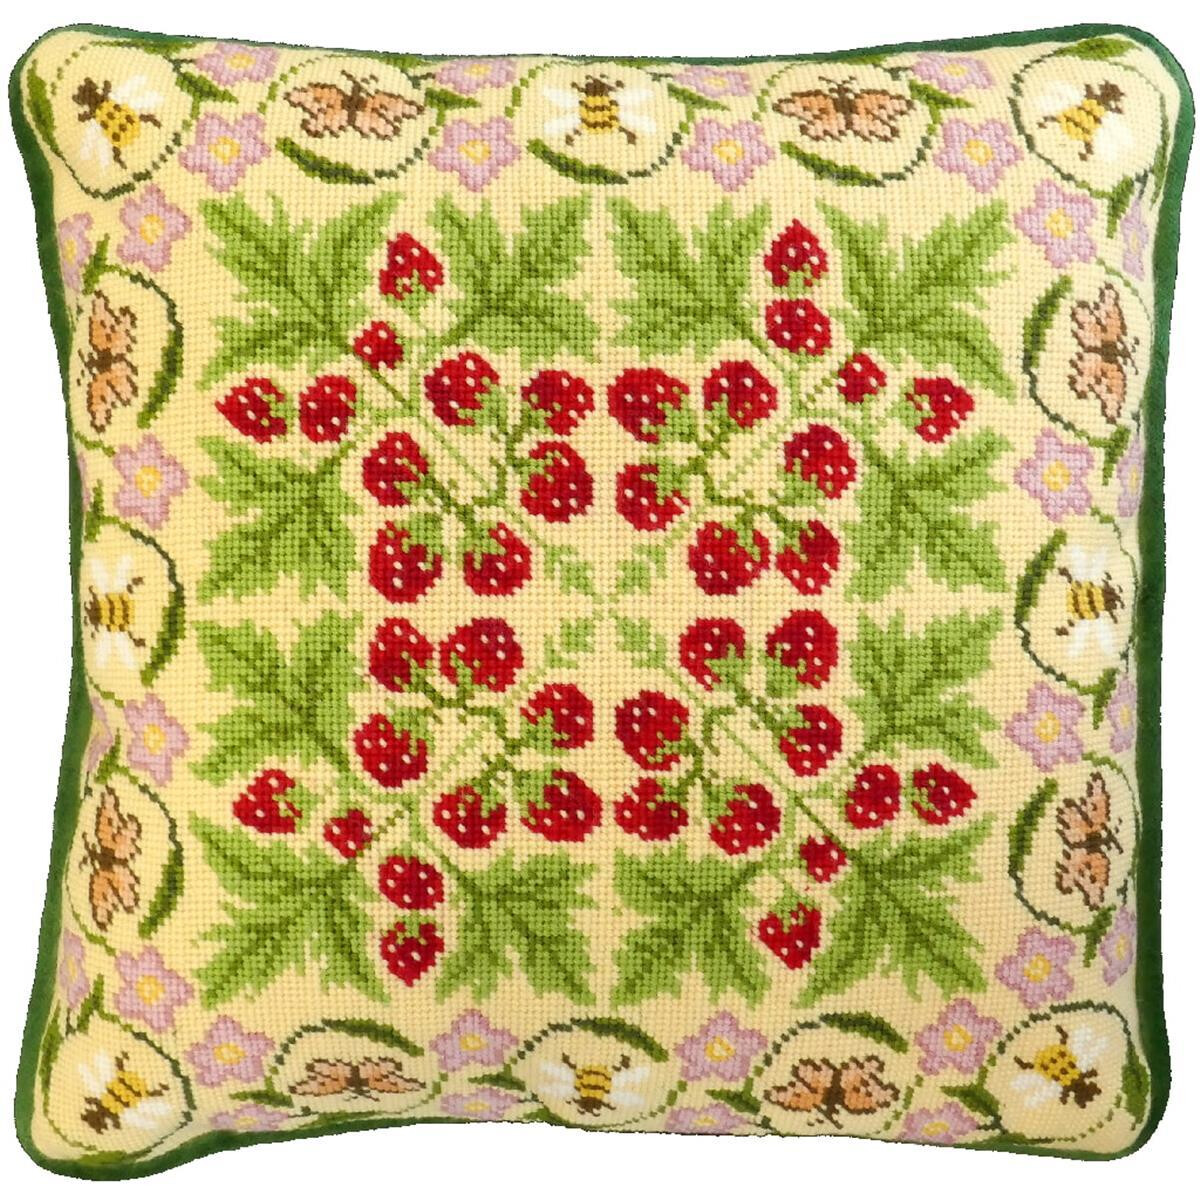 Square cushion with a decorative needlepoint pattern with...